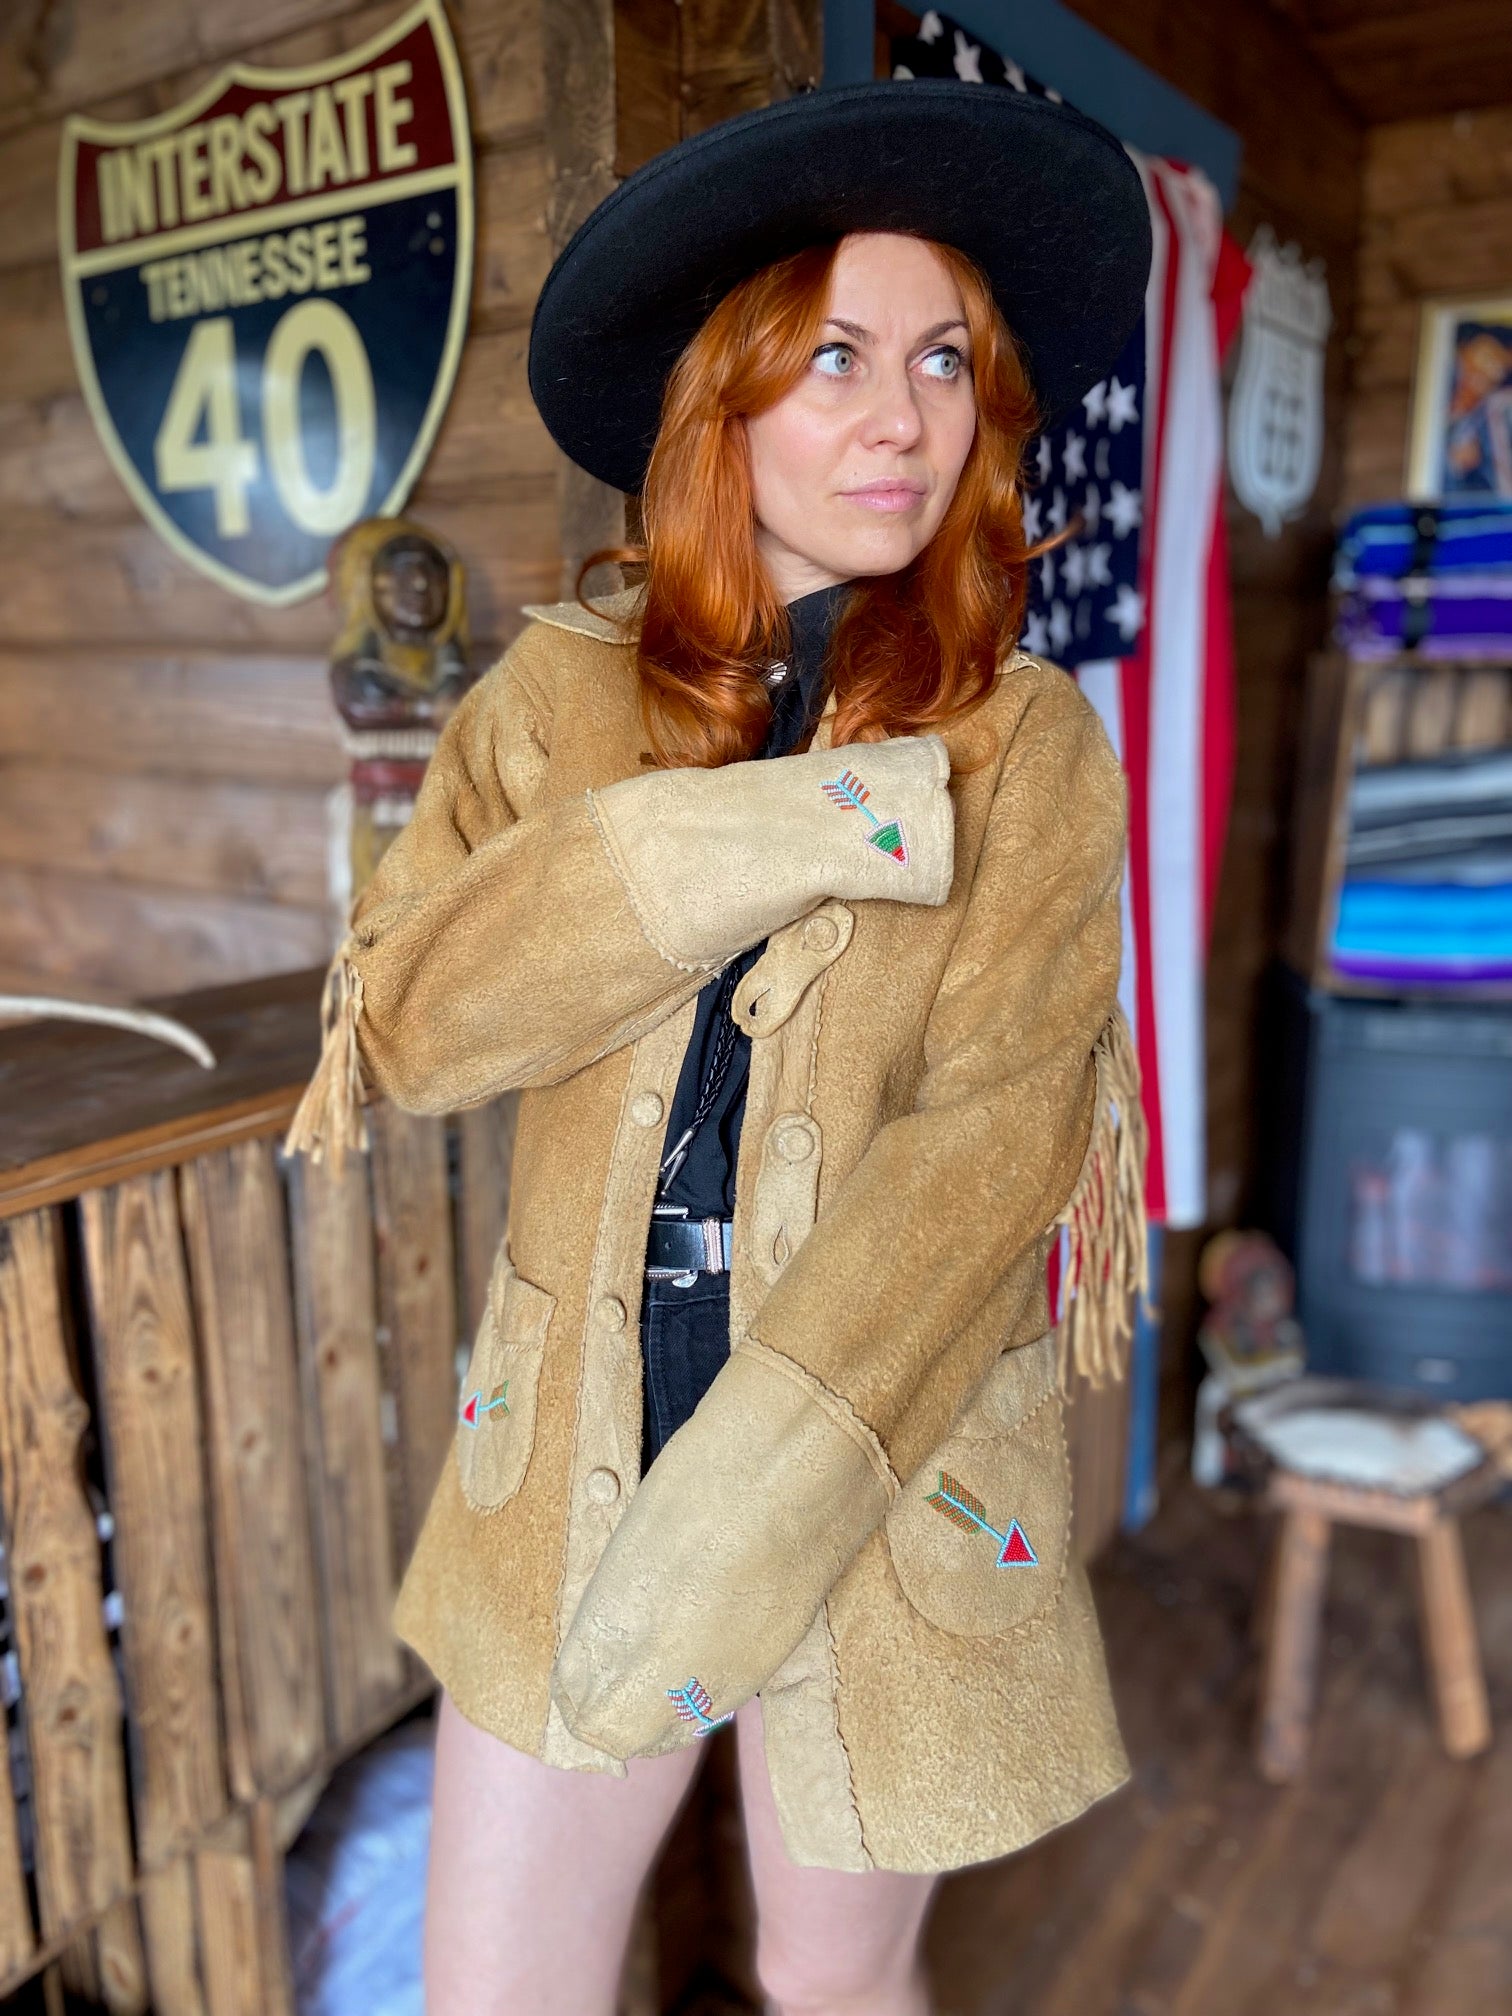 Long sued soft leather 60s western ranch frill jacket